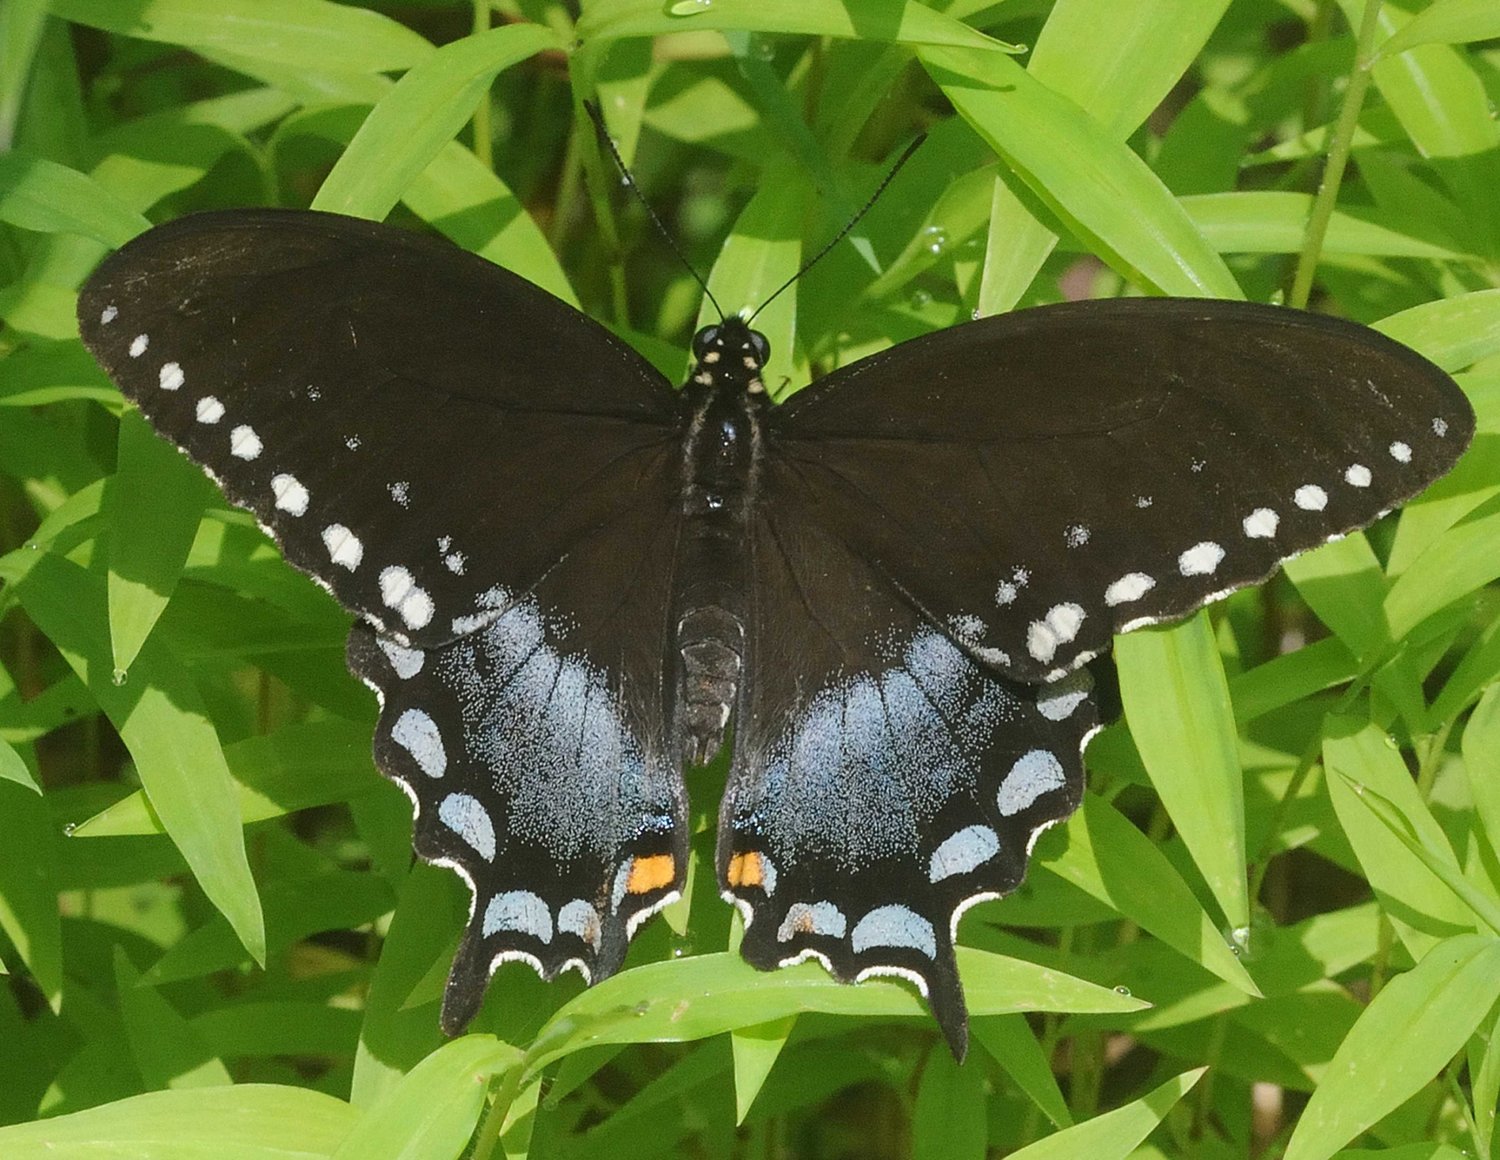 The spicebush swallowtail is frequently found along roads and woodland edges. The larval stage of this species is usually a brilliantly colored caterpillar with false eye patches to scare off predators. Because of its color, the spicebush swallowtail is easily confused with either the black swallowtail or the dark variant of the female tiger swallowtail.